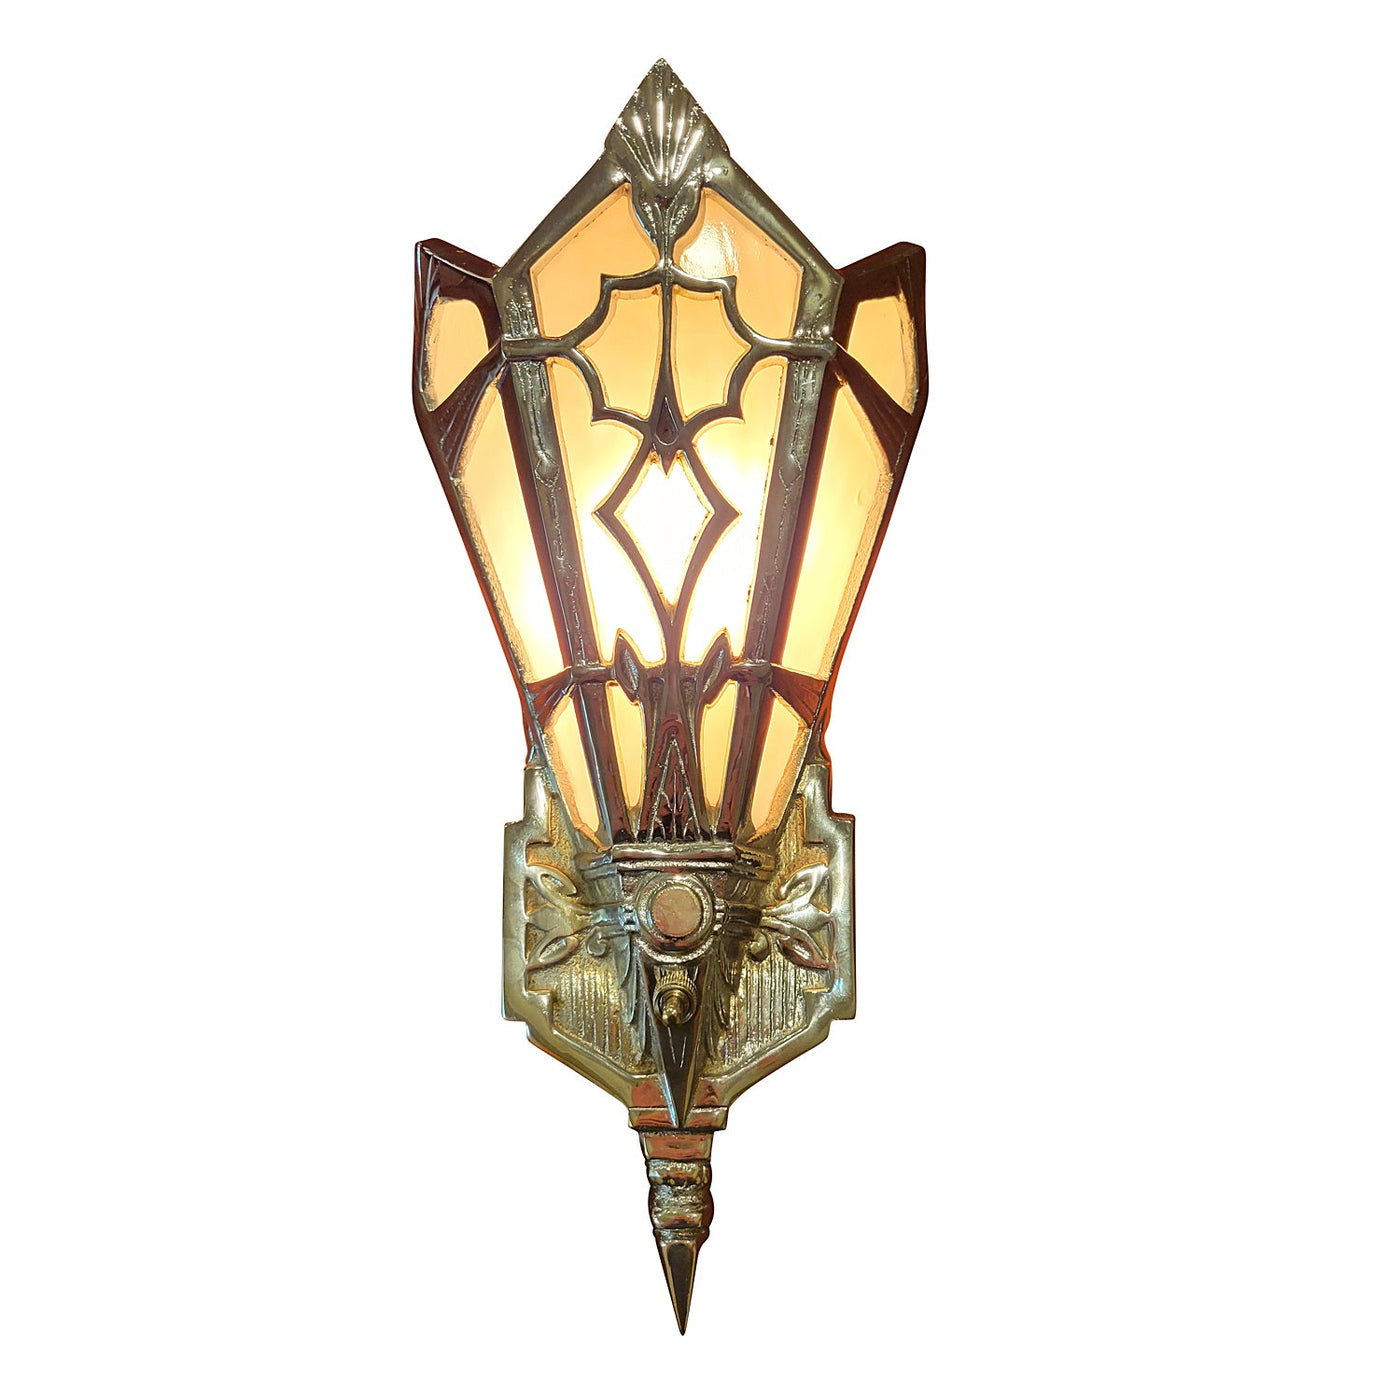 14 Inch Art Deco Stained Glass Shade Pink Champagne Wall Sconce in Polished Chrome